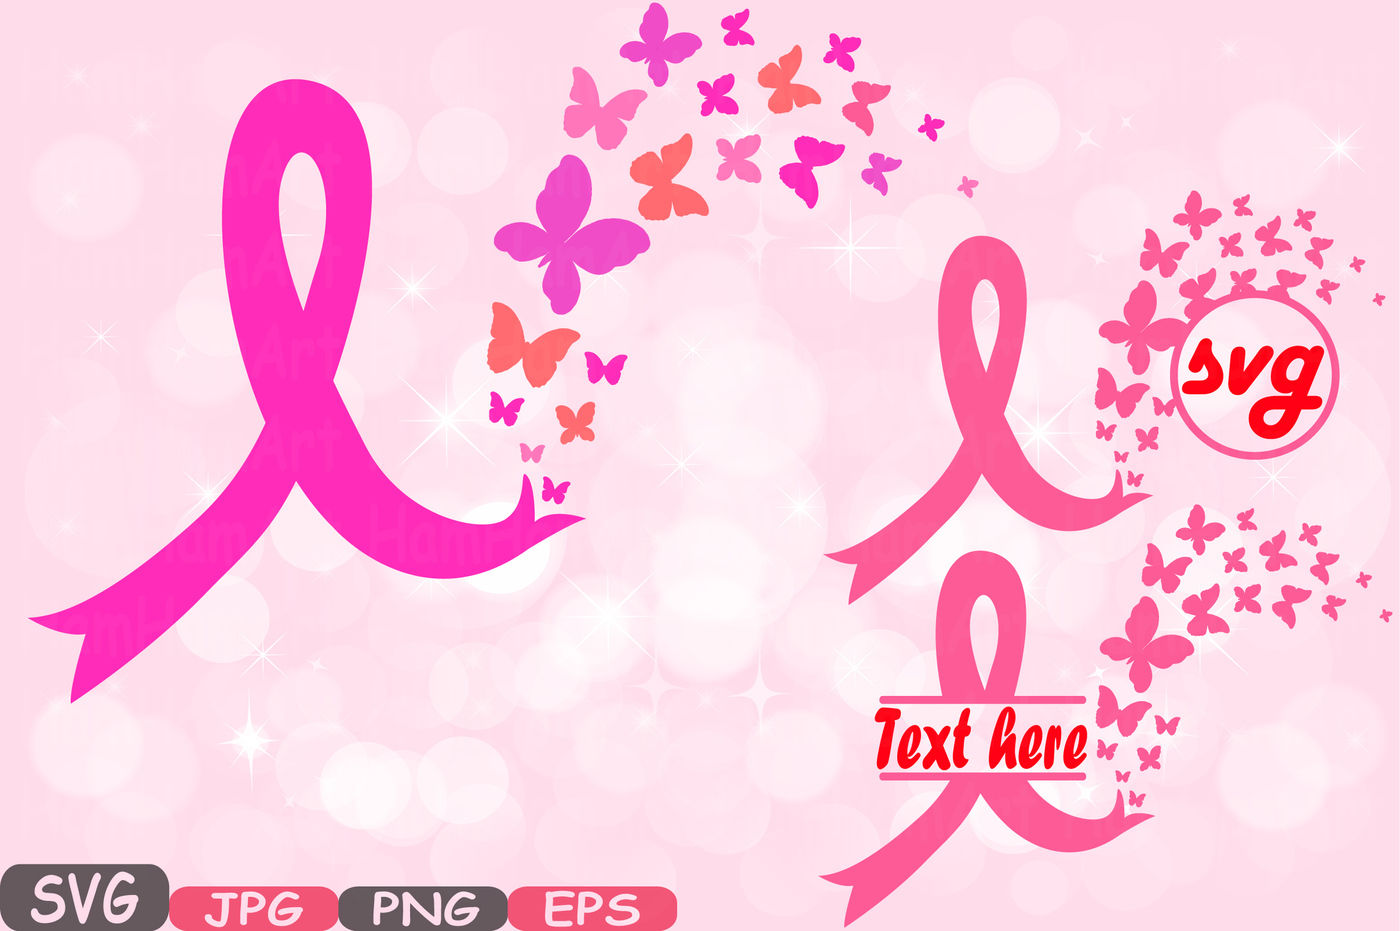 Download Breast Cancer Butterfly Svg Cricut Silhouette Swirl Props Cutting Files Awareness Circle Split Survivor Clipart Digital Vinyl 517s By Hamhamart Thehungryjpeg Com SVG, PNG, EPS, DXF File